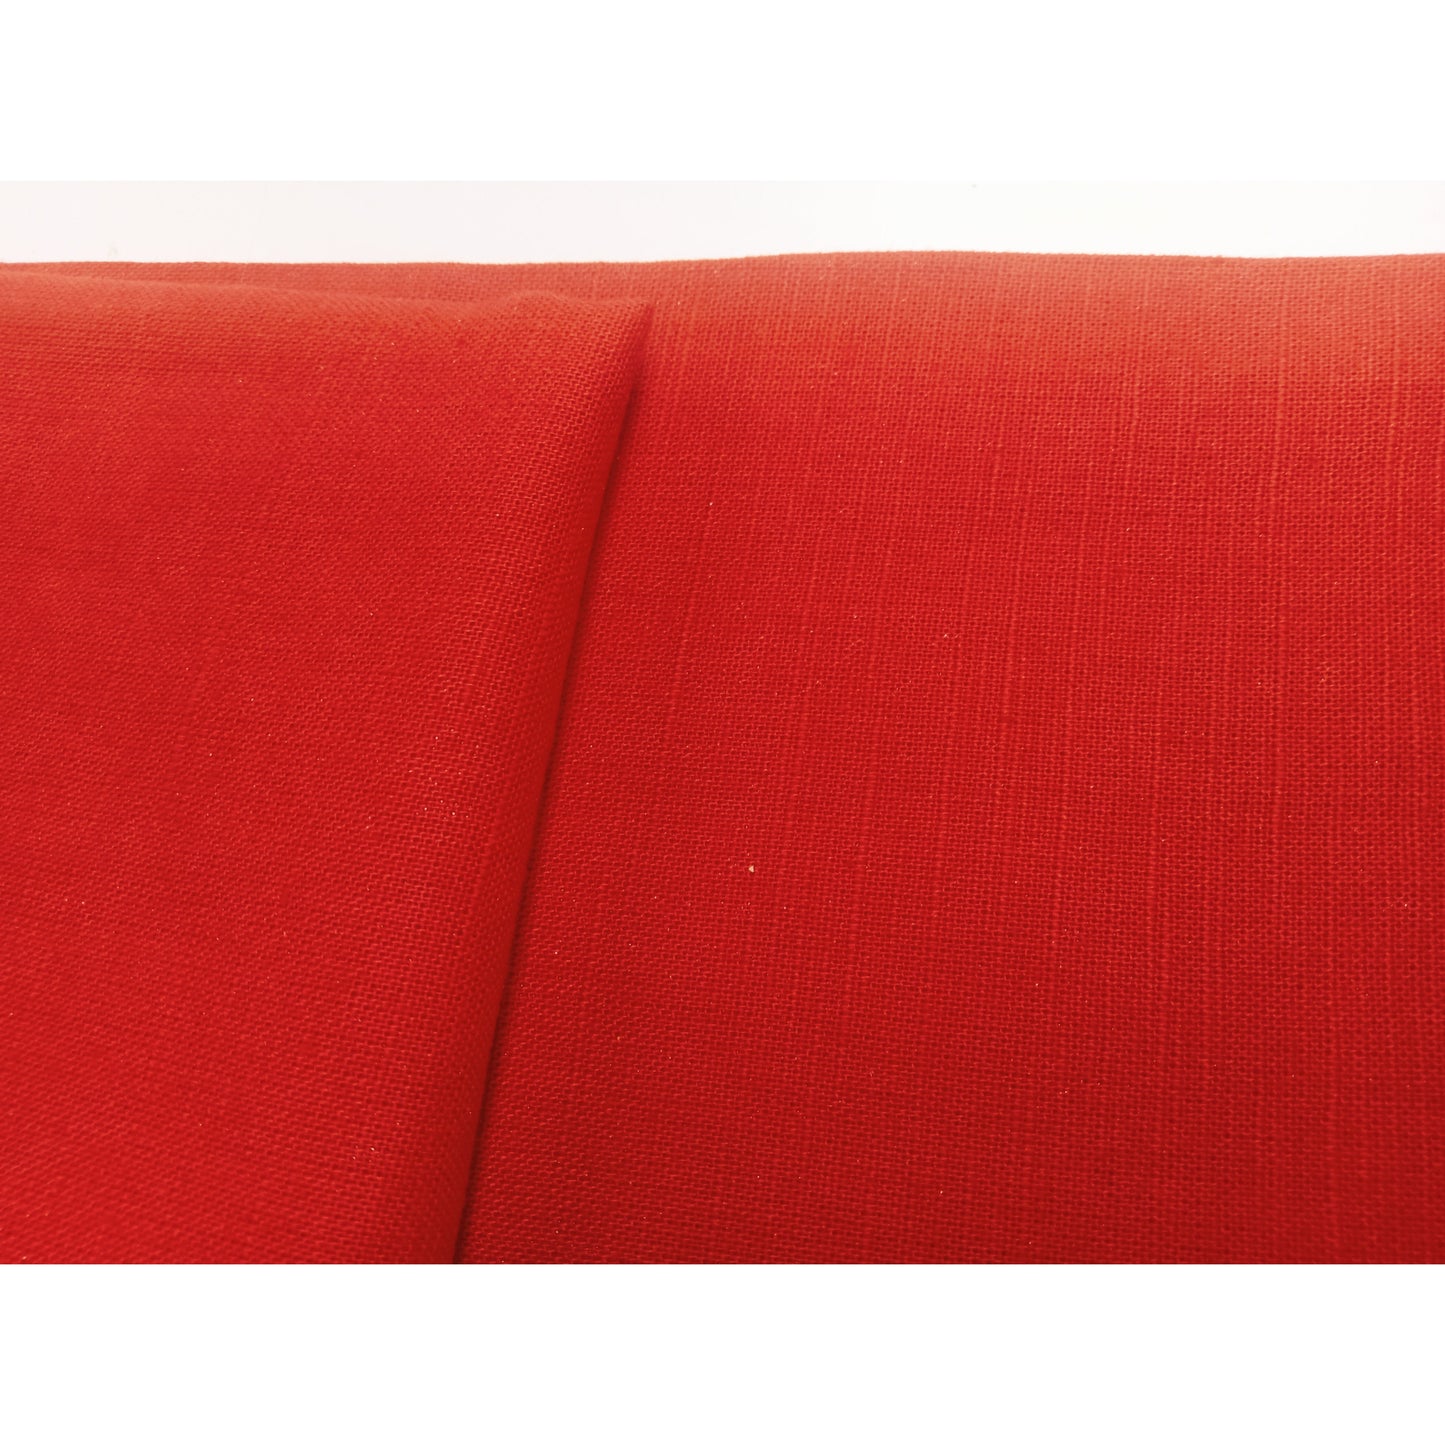 Indi red - woven cotton/linen fabric - sold by 1/2mtr